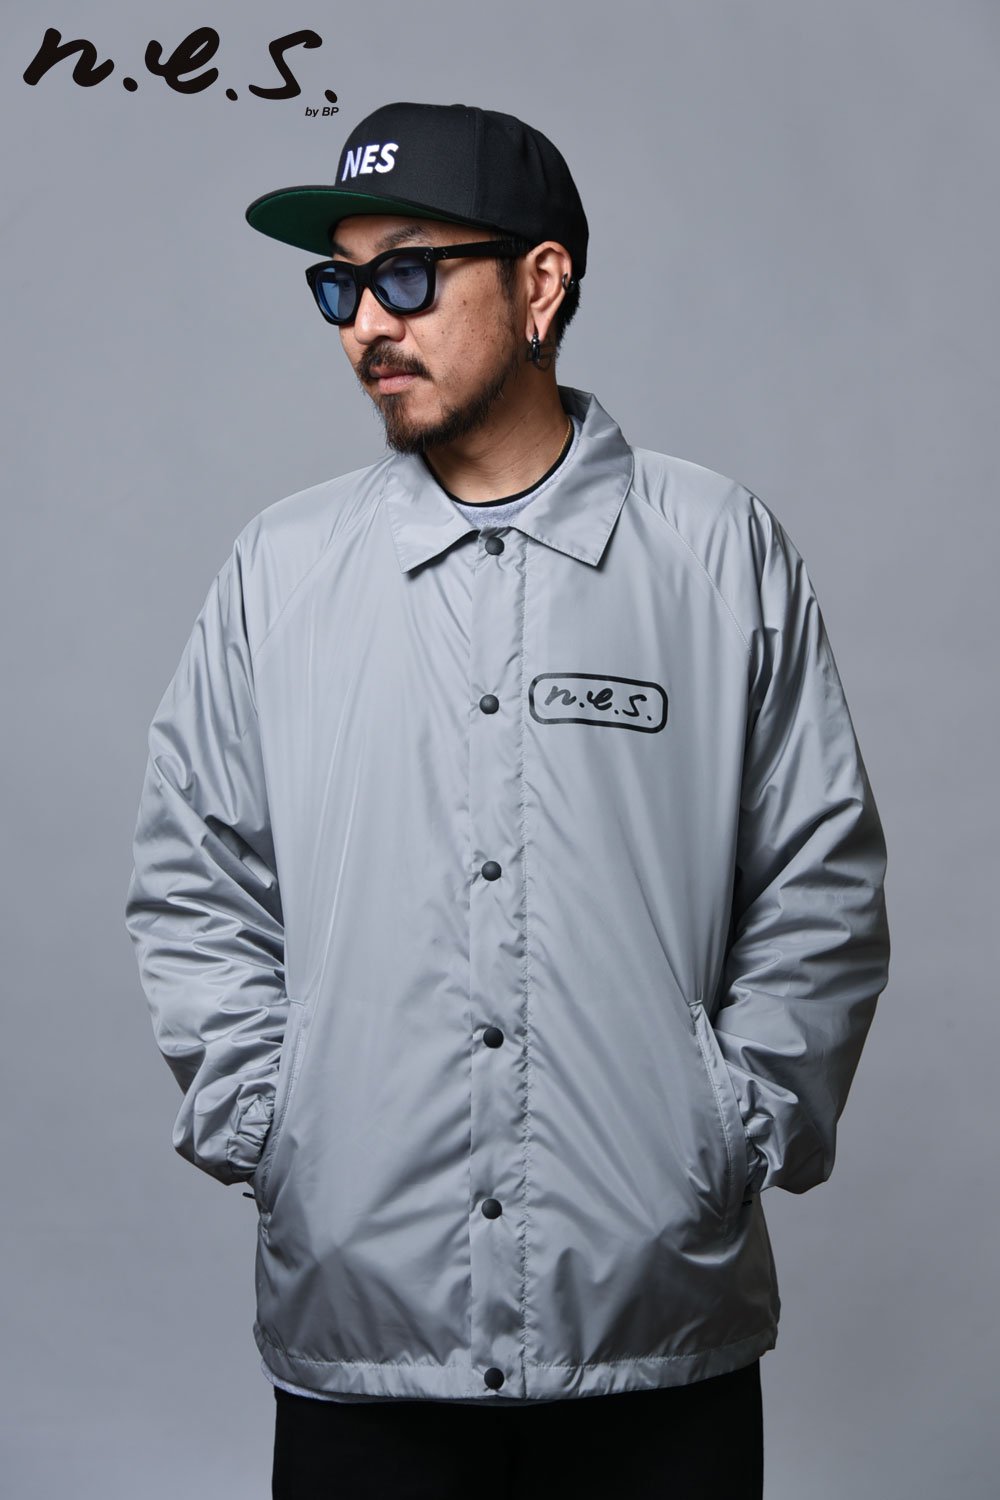 n.e.s. by BP(ネズ バイ ビーピー) コーチジャケット N.E.S. Logo Coach Jacket 公式通販 |  ハーレムストア公式通販サイト